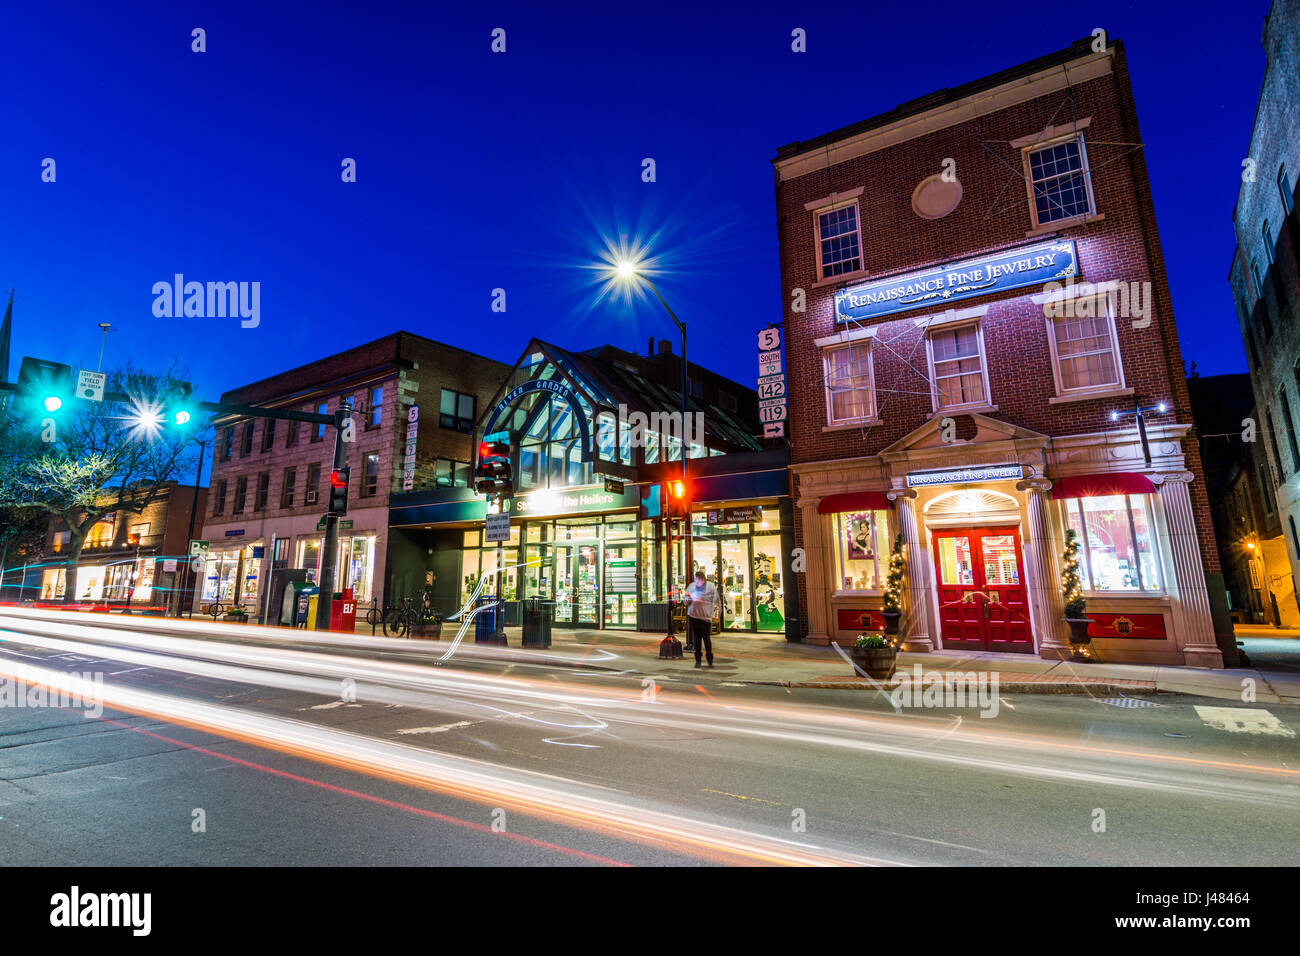 Small Cozy Downtown of Brattleboro, Vermont at Night Stock Photo